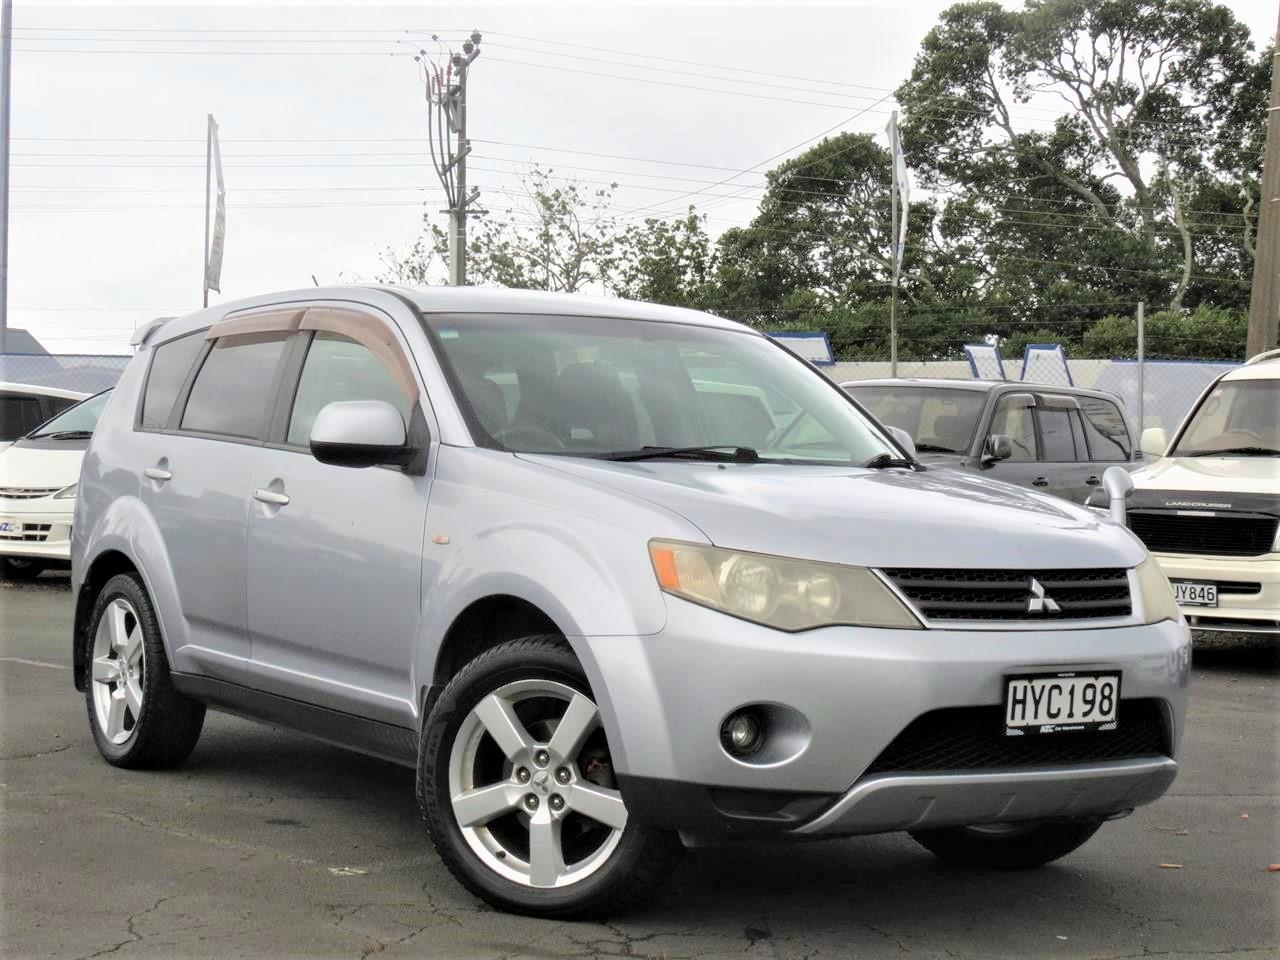 NZC 2006 Mitsubishi Outlander just arrived to Auckland